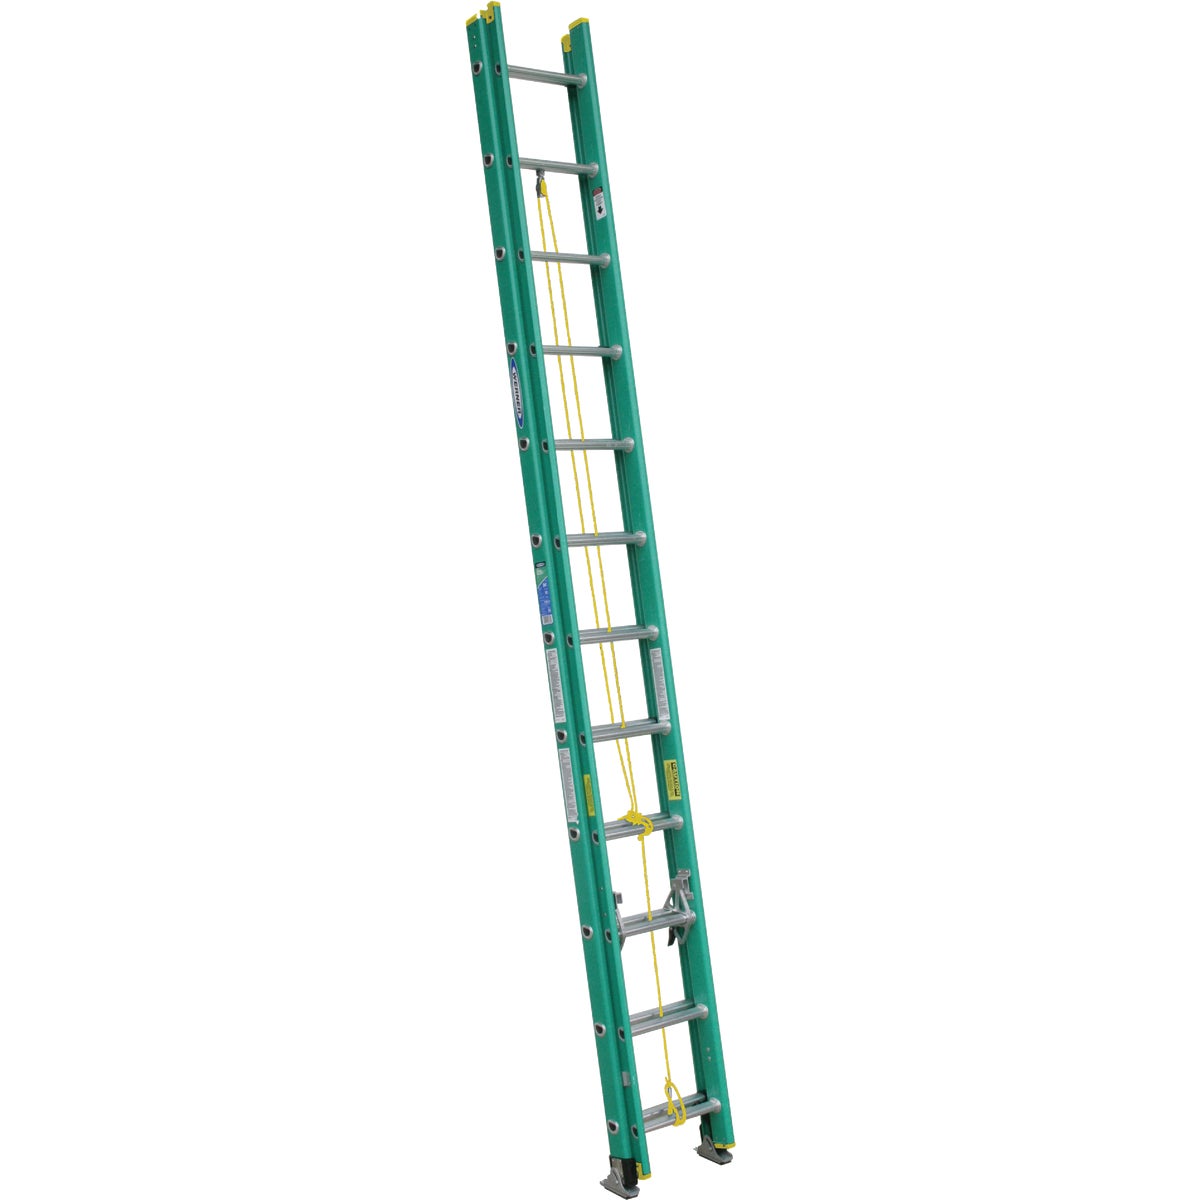 Werner 24 Ft. Fiberglass Extension Ladder with 225 Lb. Load Capacity Type II Duty Rating